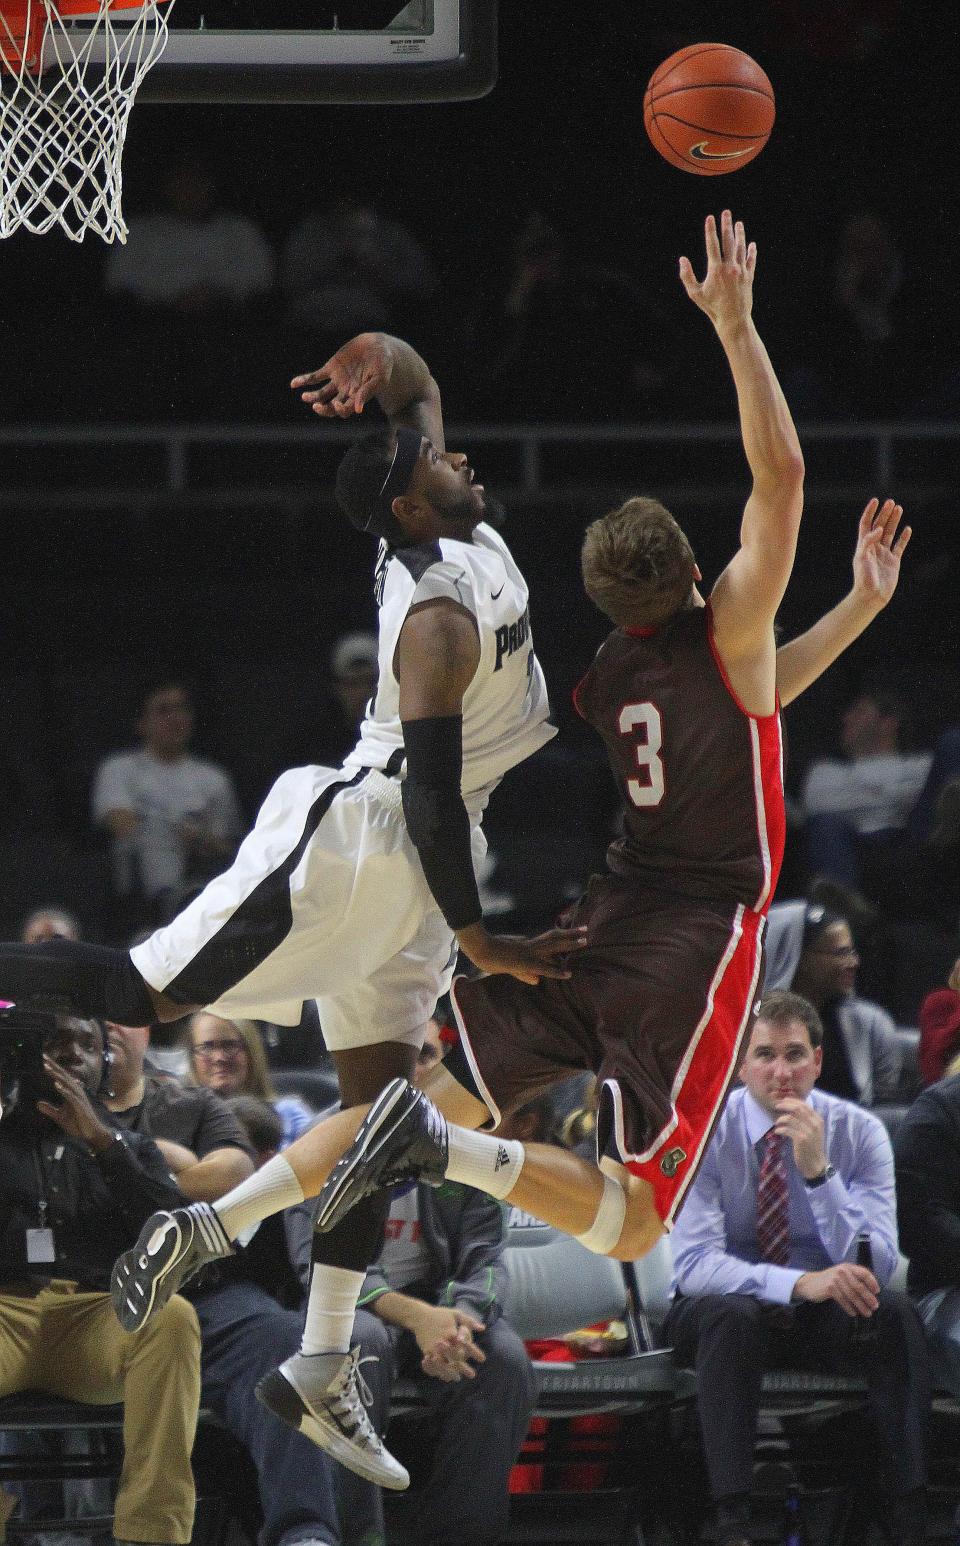 PC's LaDontae Henton, left, fouls Brown's Steven Spieth during a game in 2013.